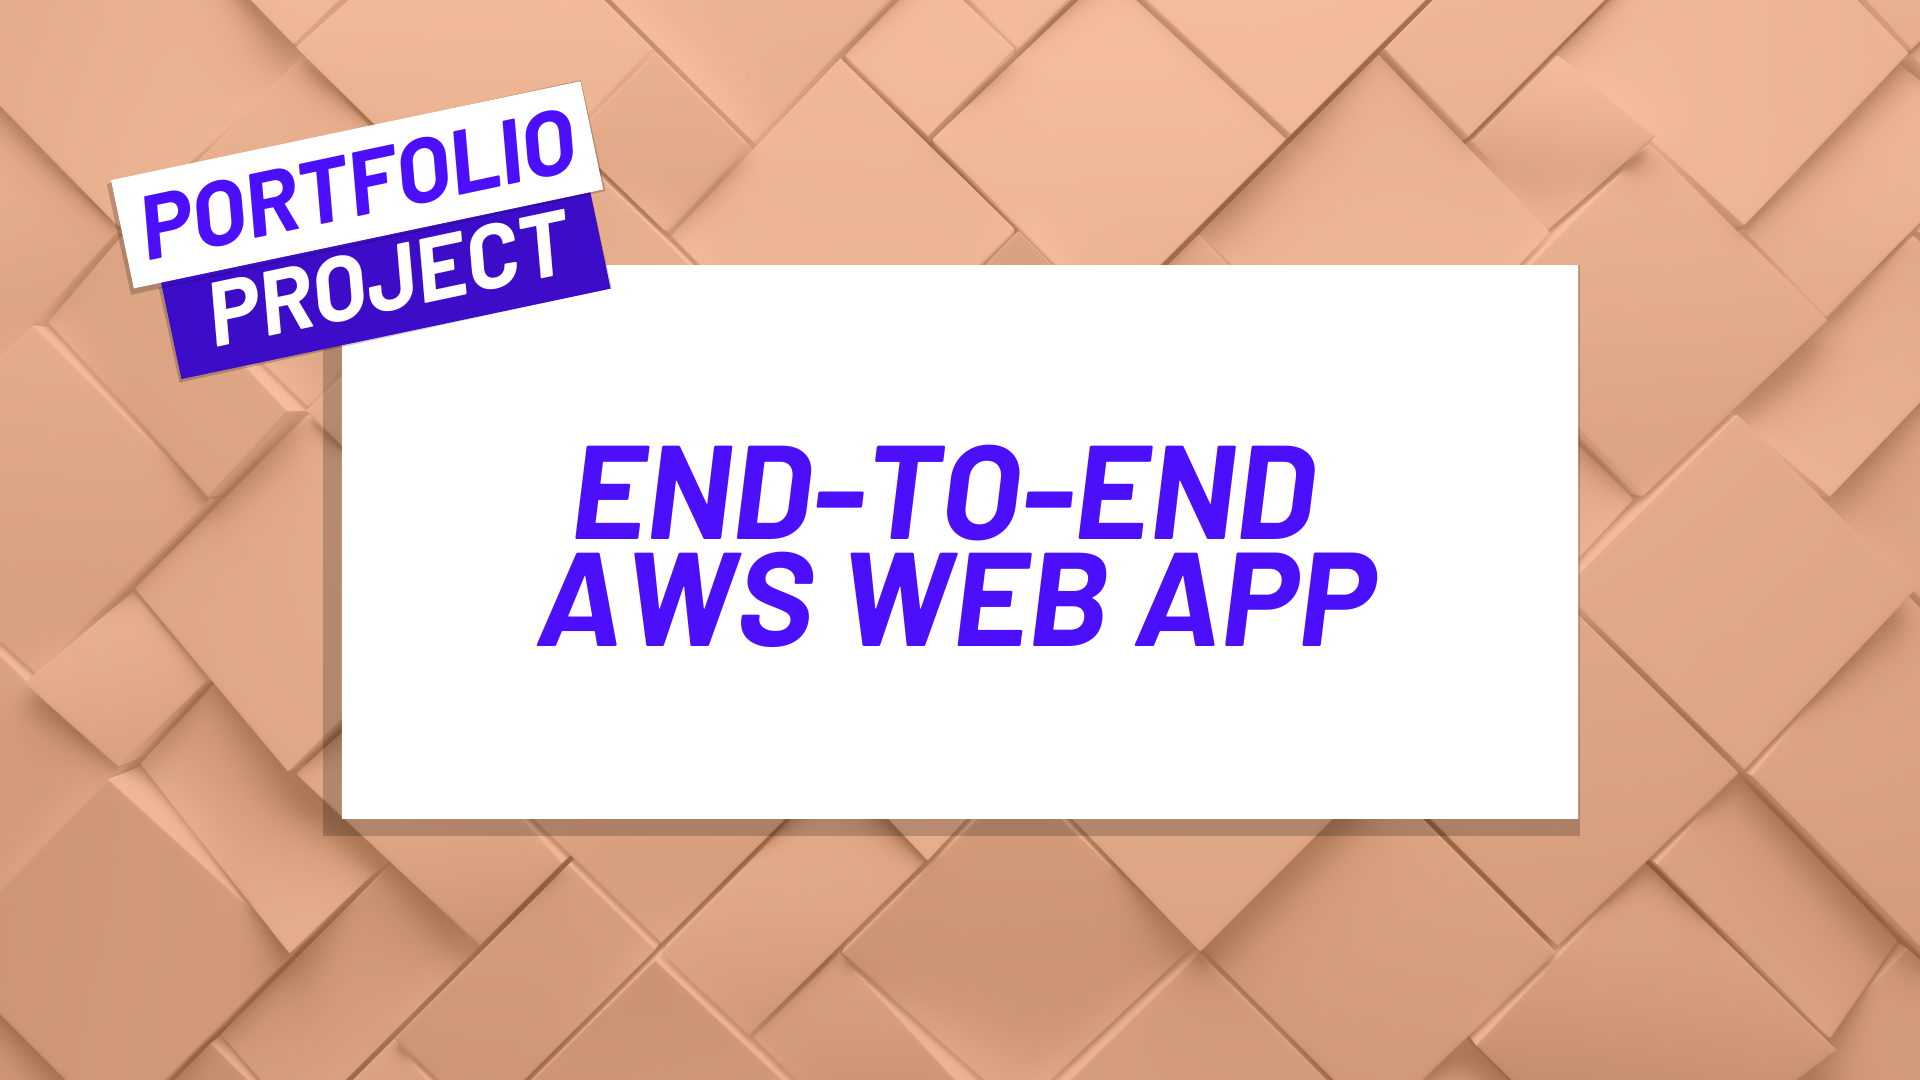 Build an End-to-End Web App from Scratch in AWS preview